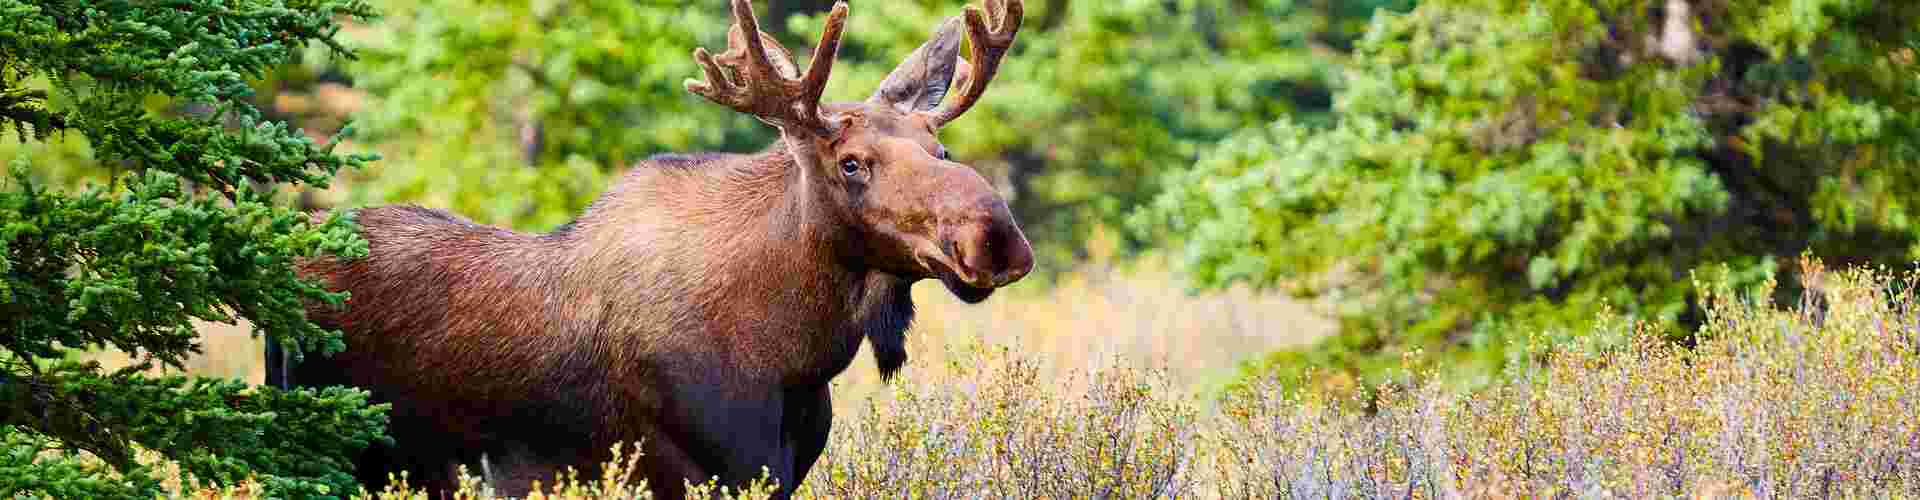 A moose in the wild in Denali National Park